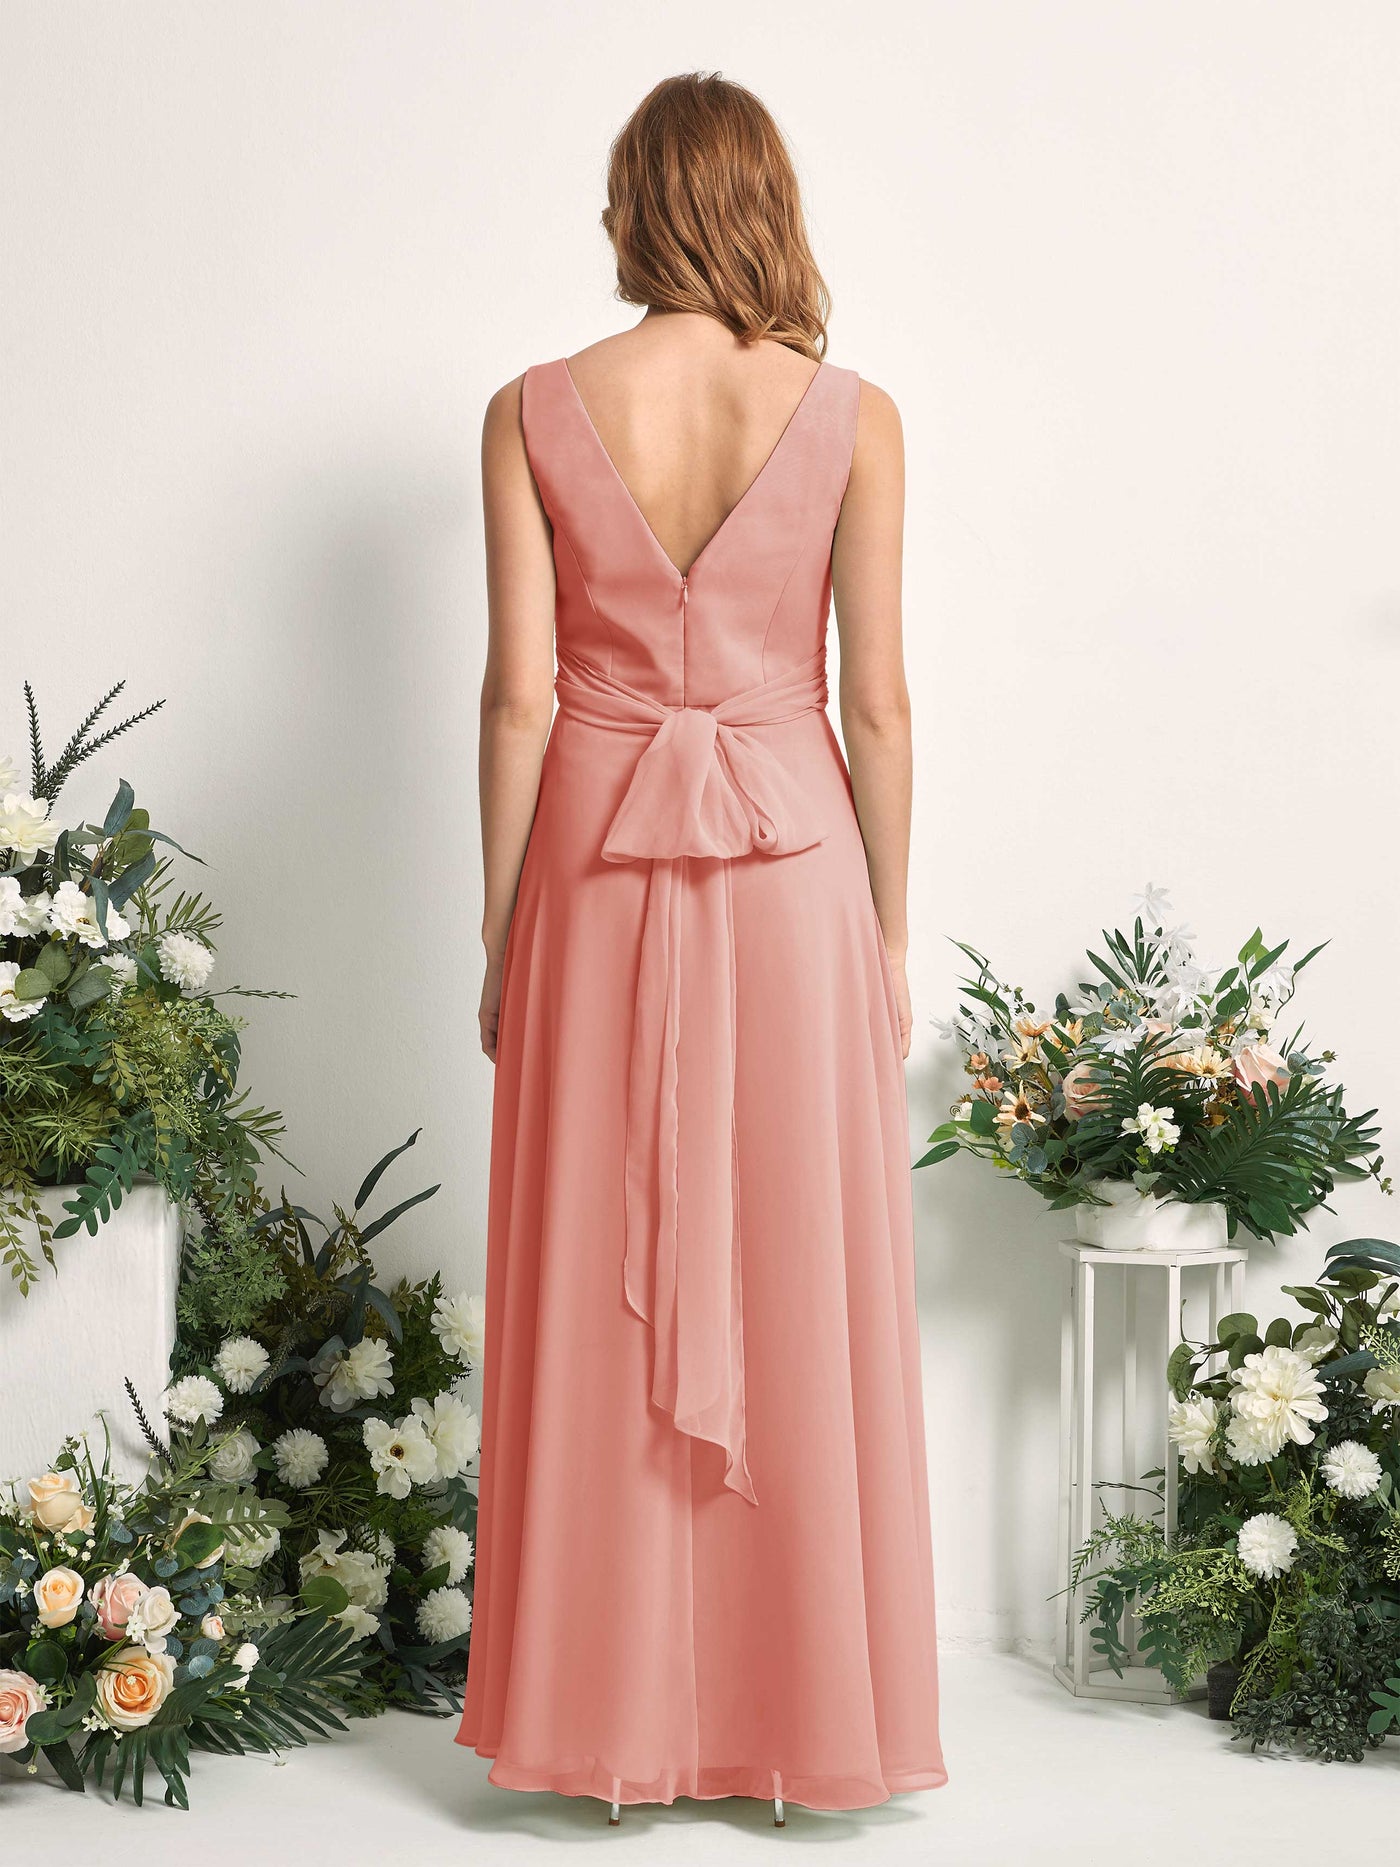 Bridesmaid Dress A-line Chiffon Straps Full Length Sleeveless Wedding Party Dress - Champagne Rose (81227306)#color_champagne-rose